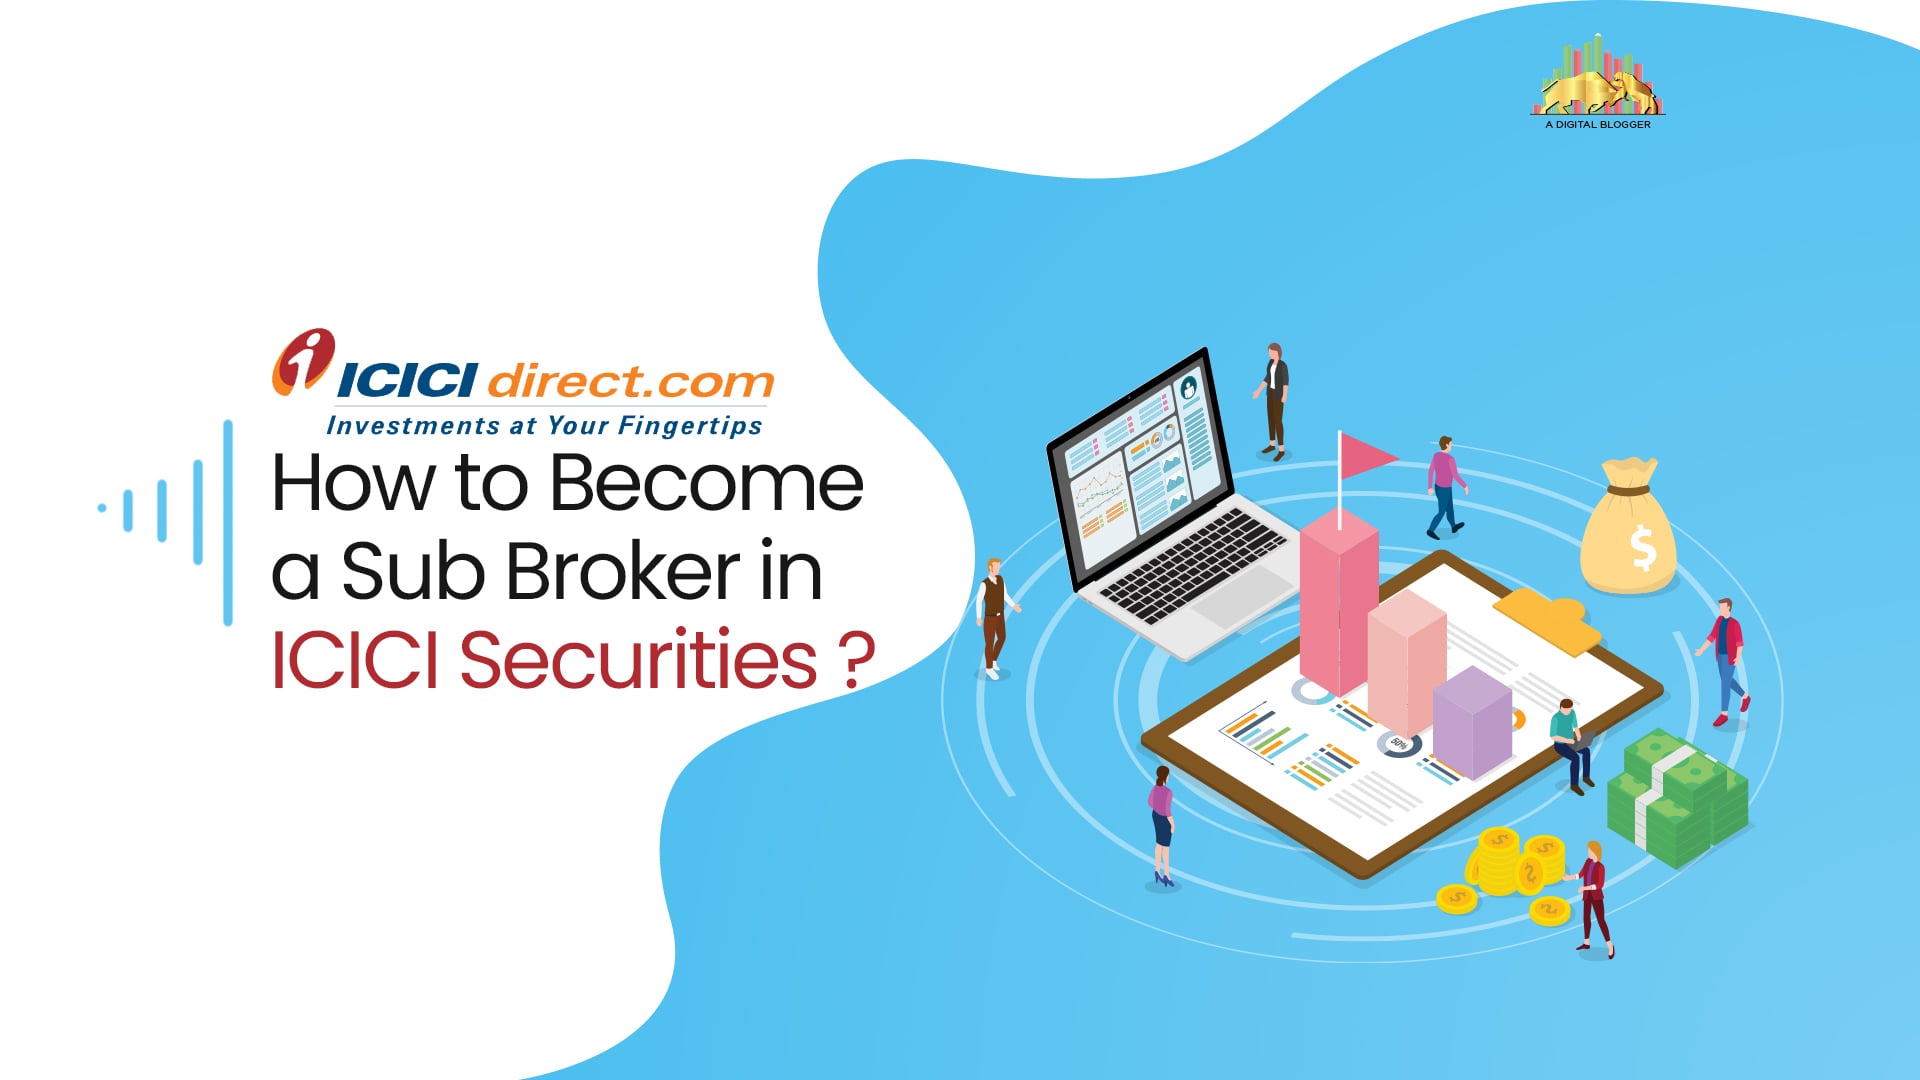 How to Become a Sub Broker in ICICI Securities